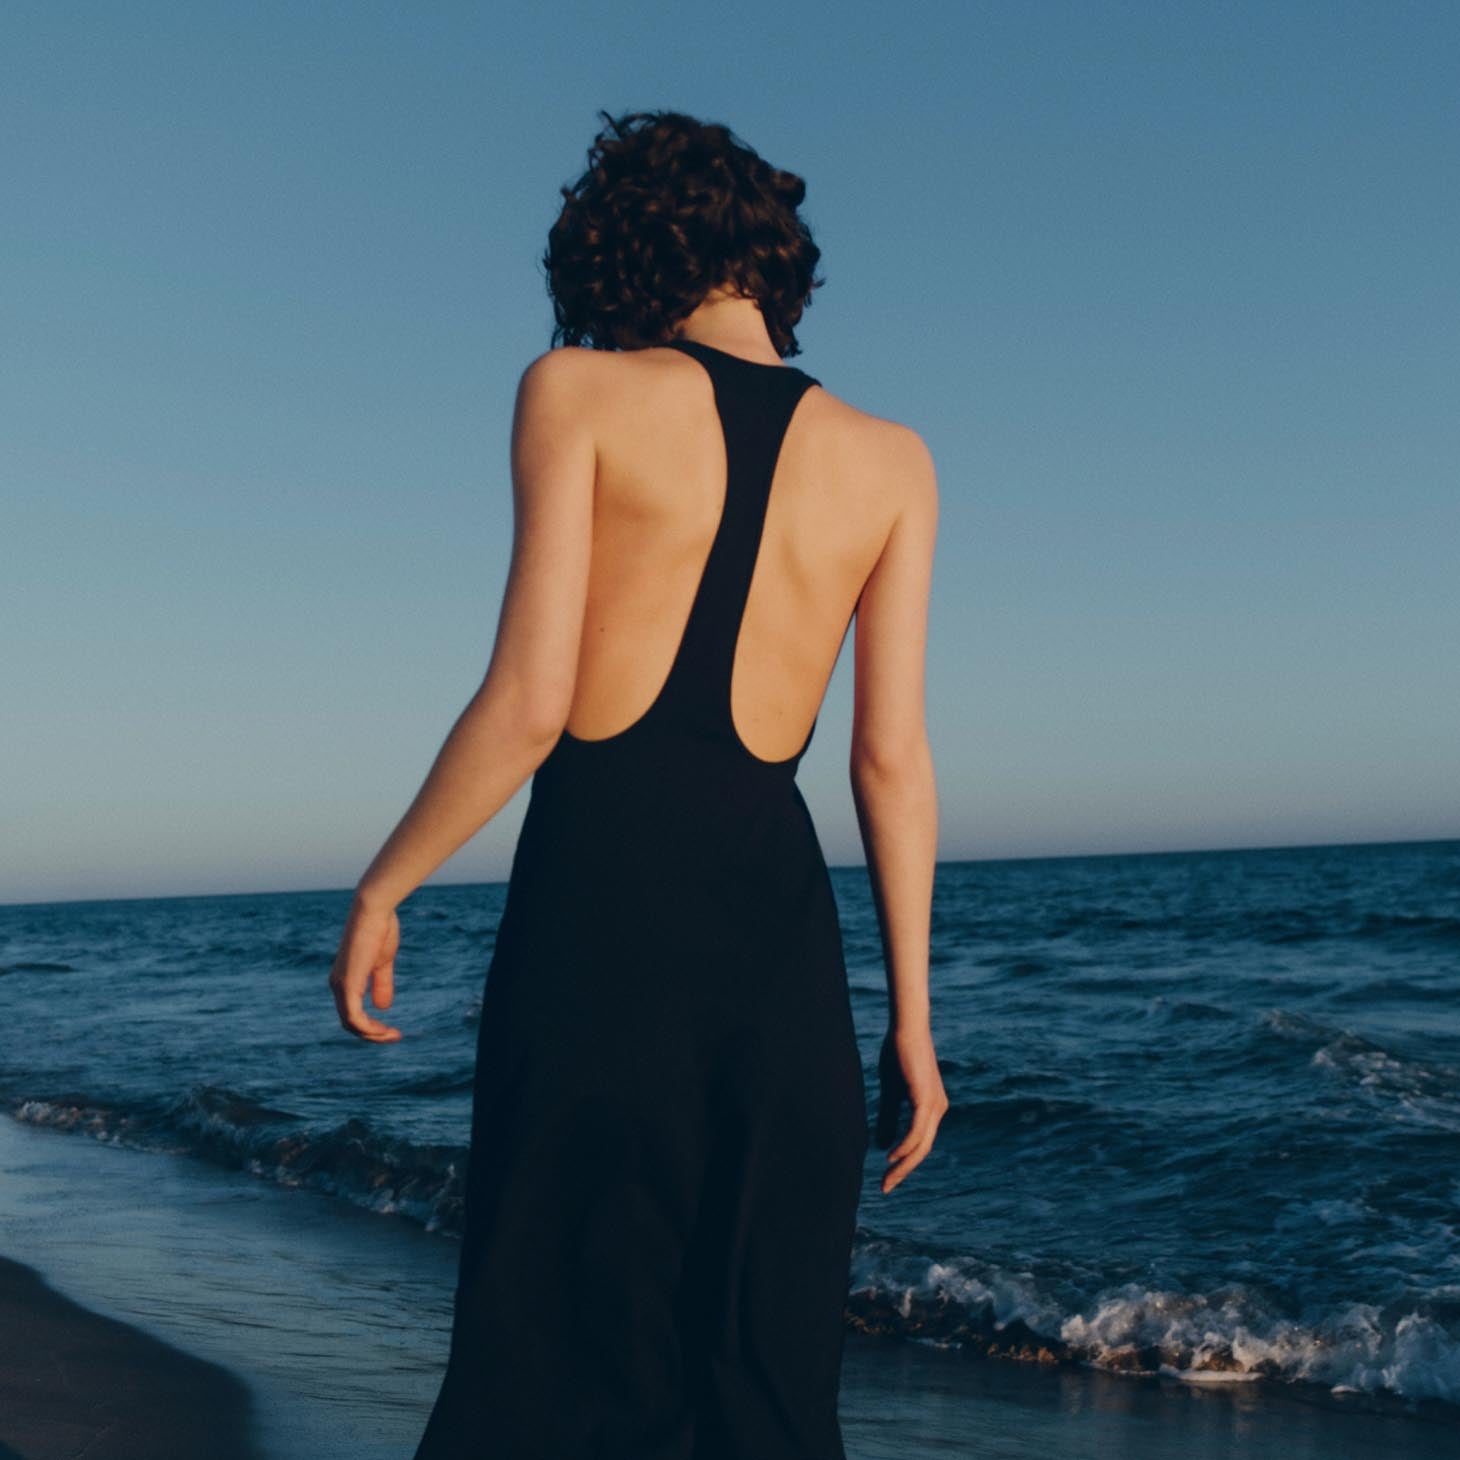 The back of a woman on a beach in a black racerback dress